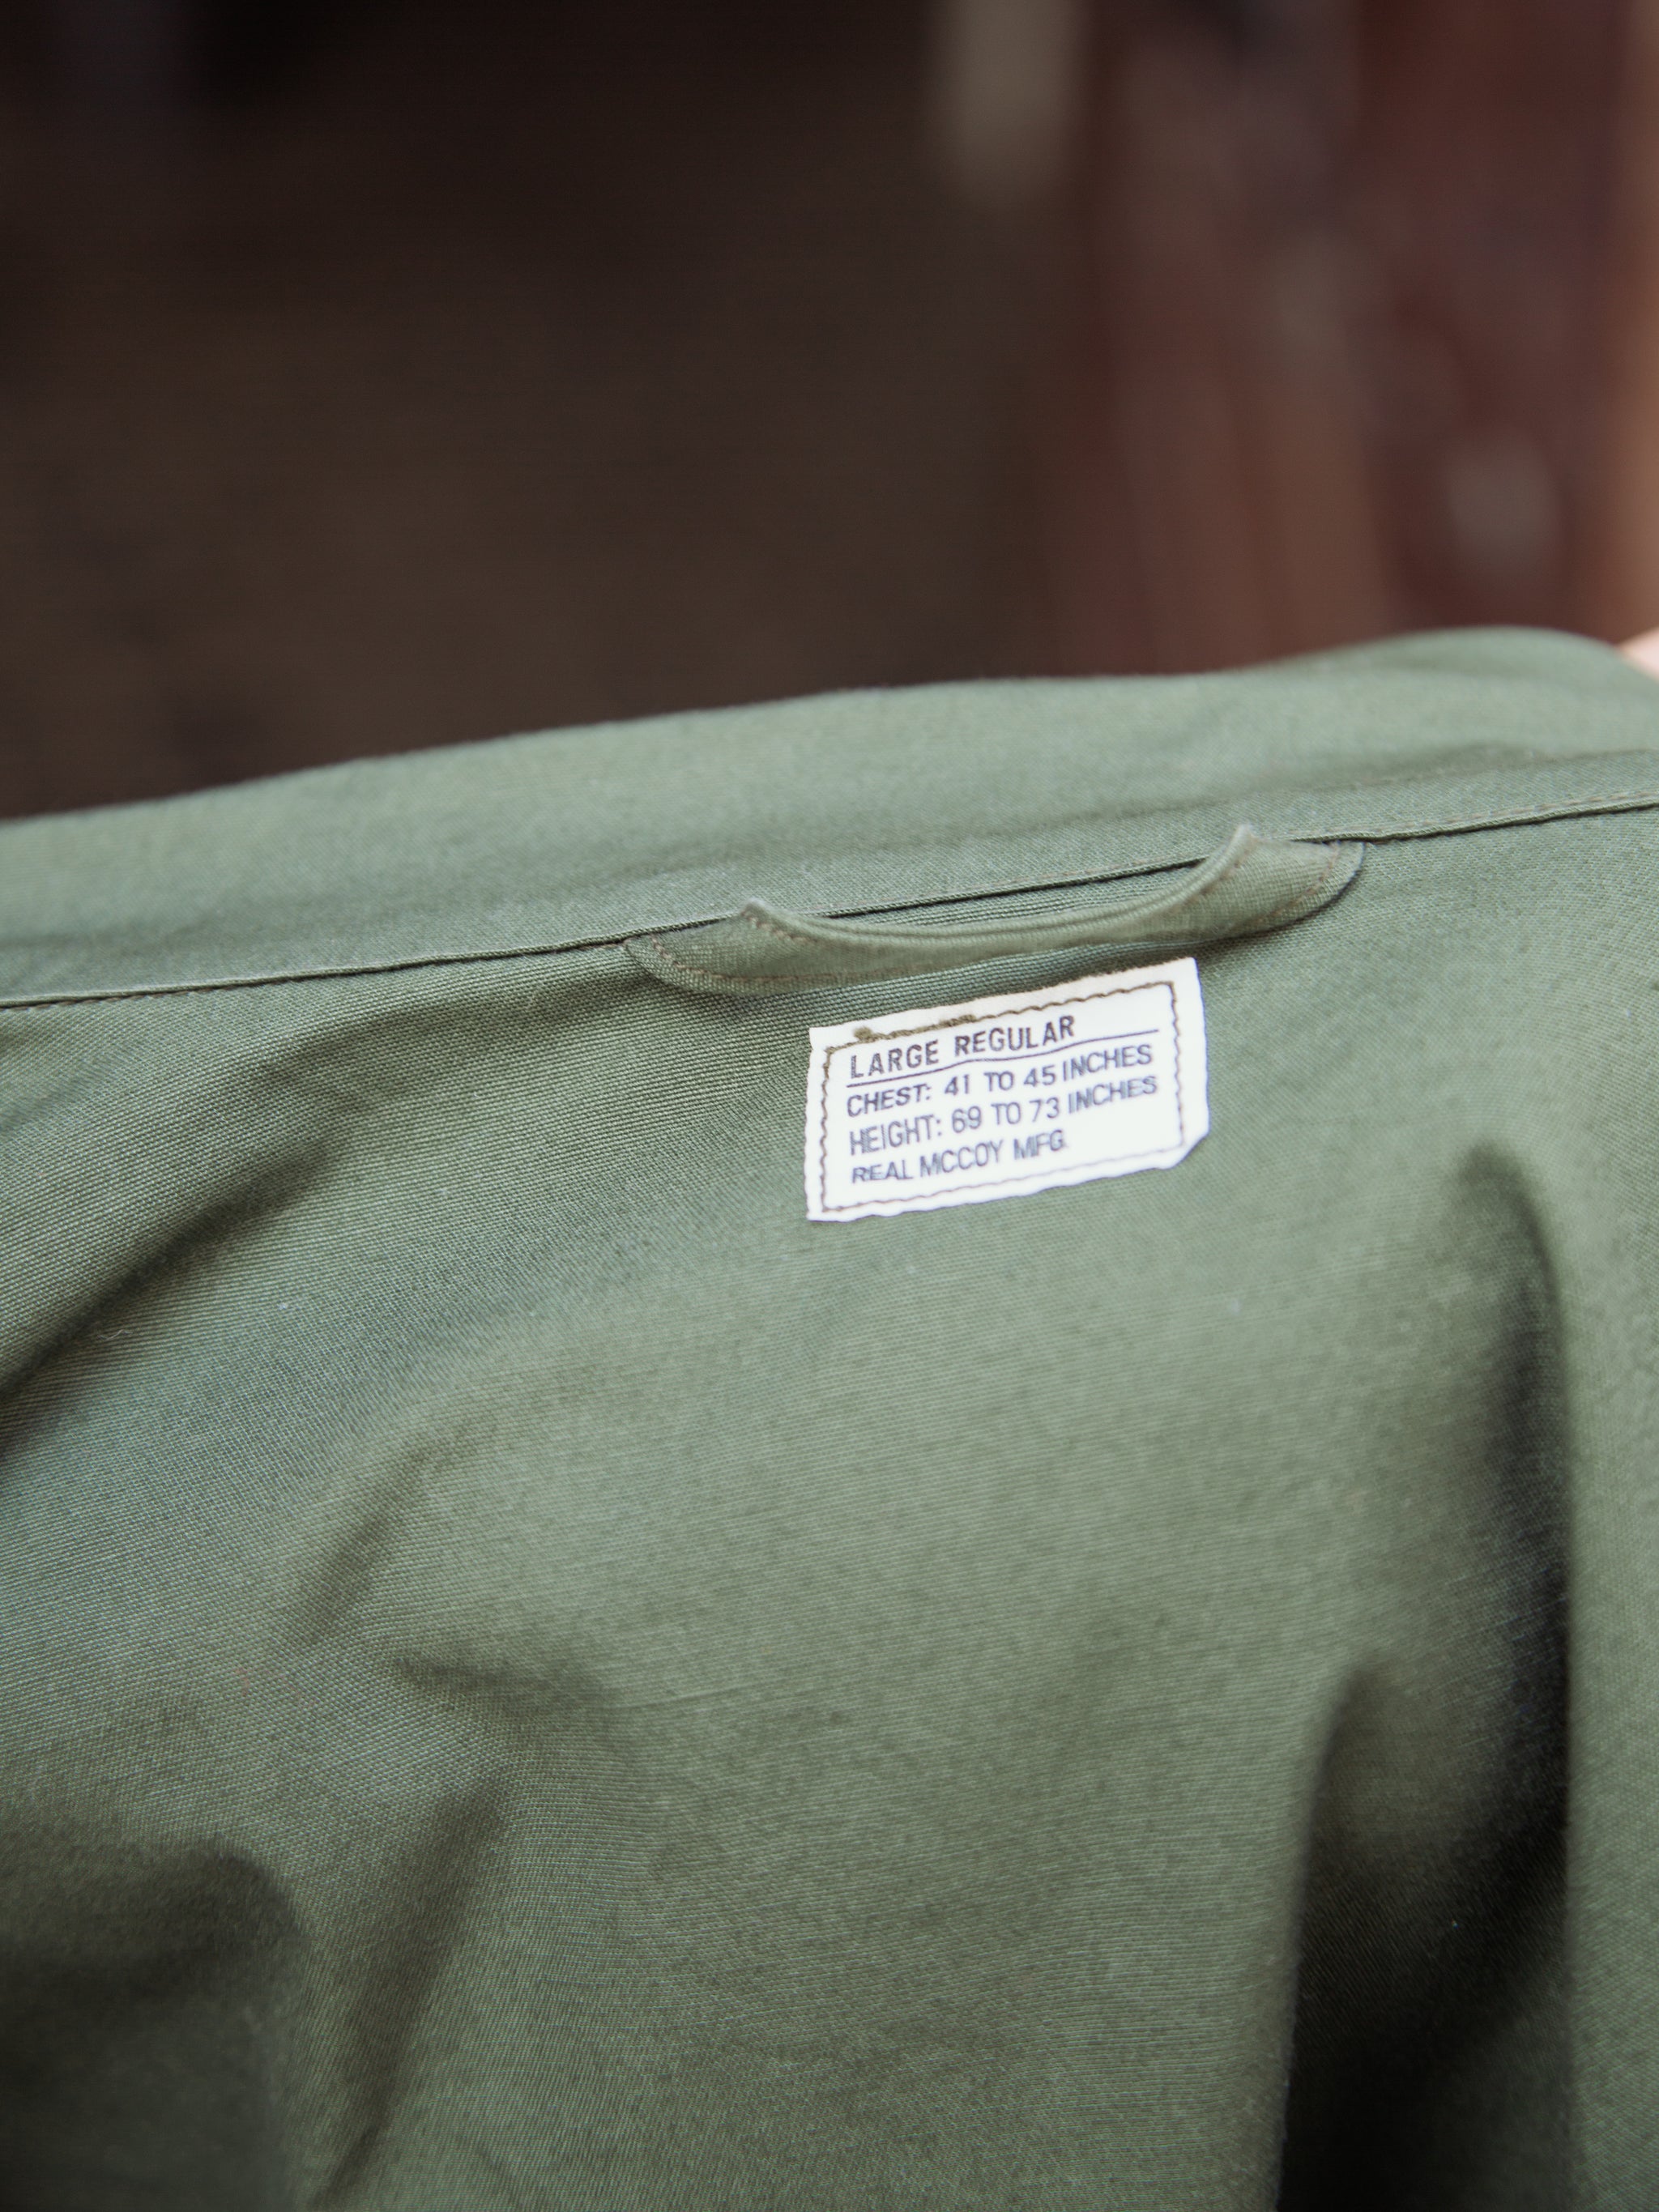 The Real McCoy's MJ22006 Tropical Combat Coat - Olive | denimheads.cz